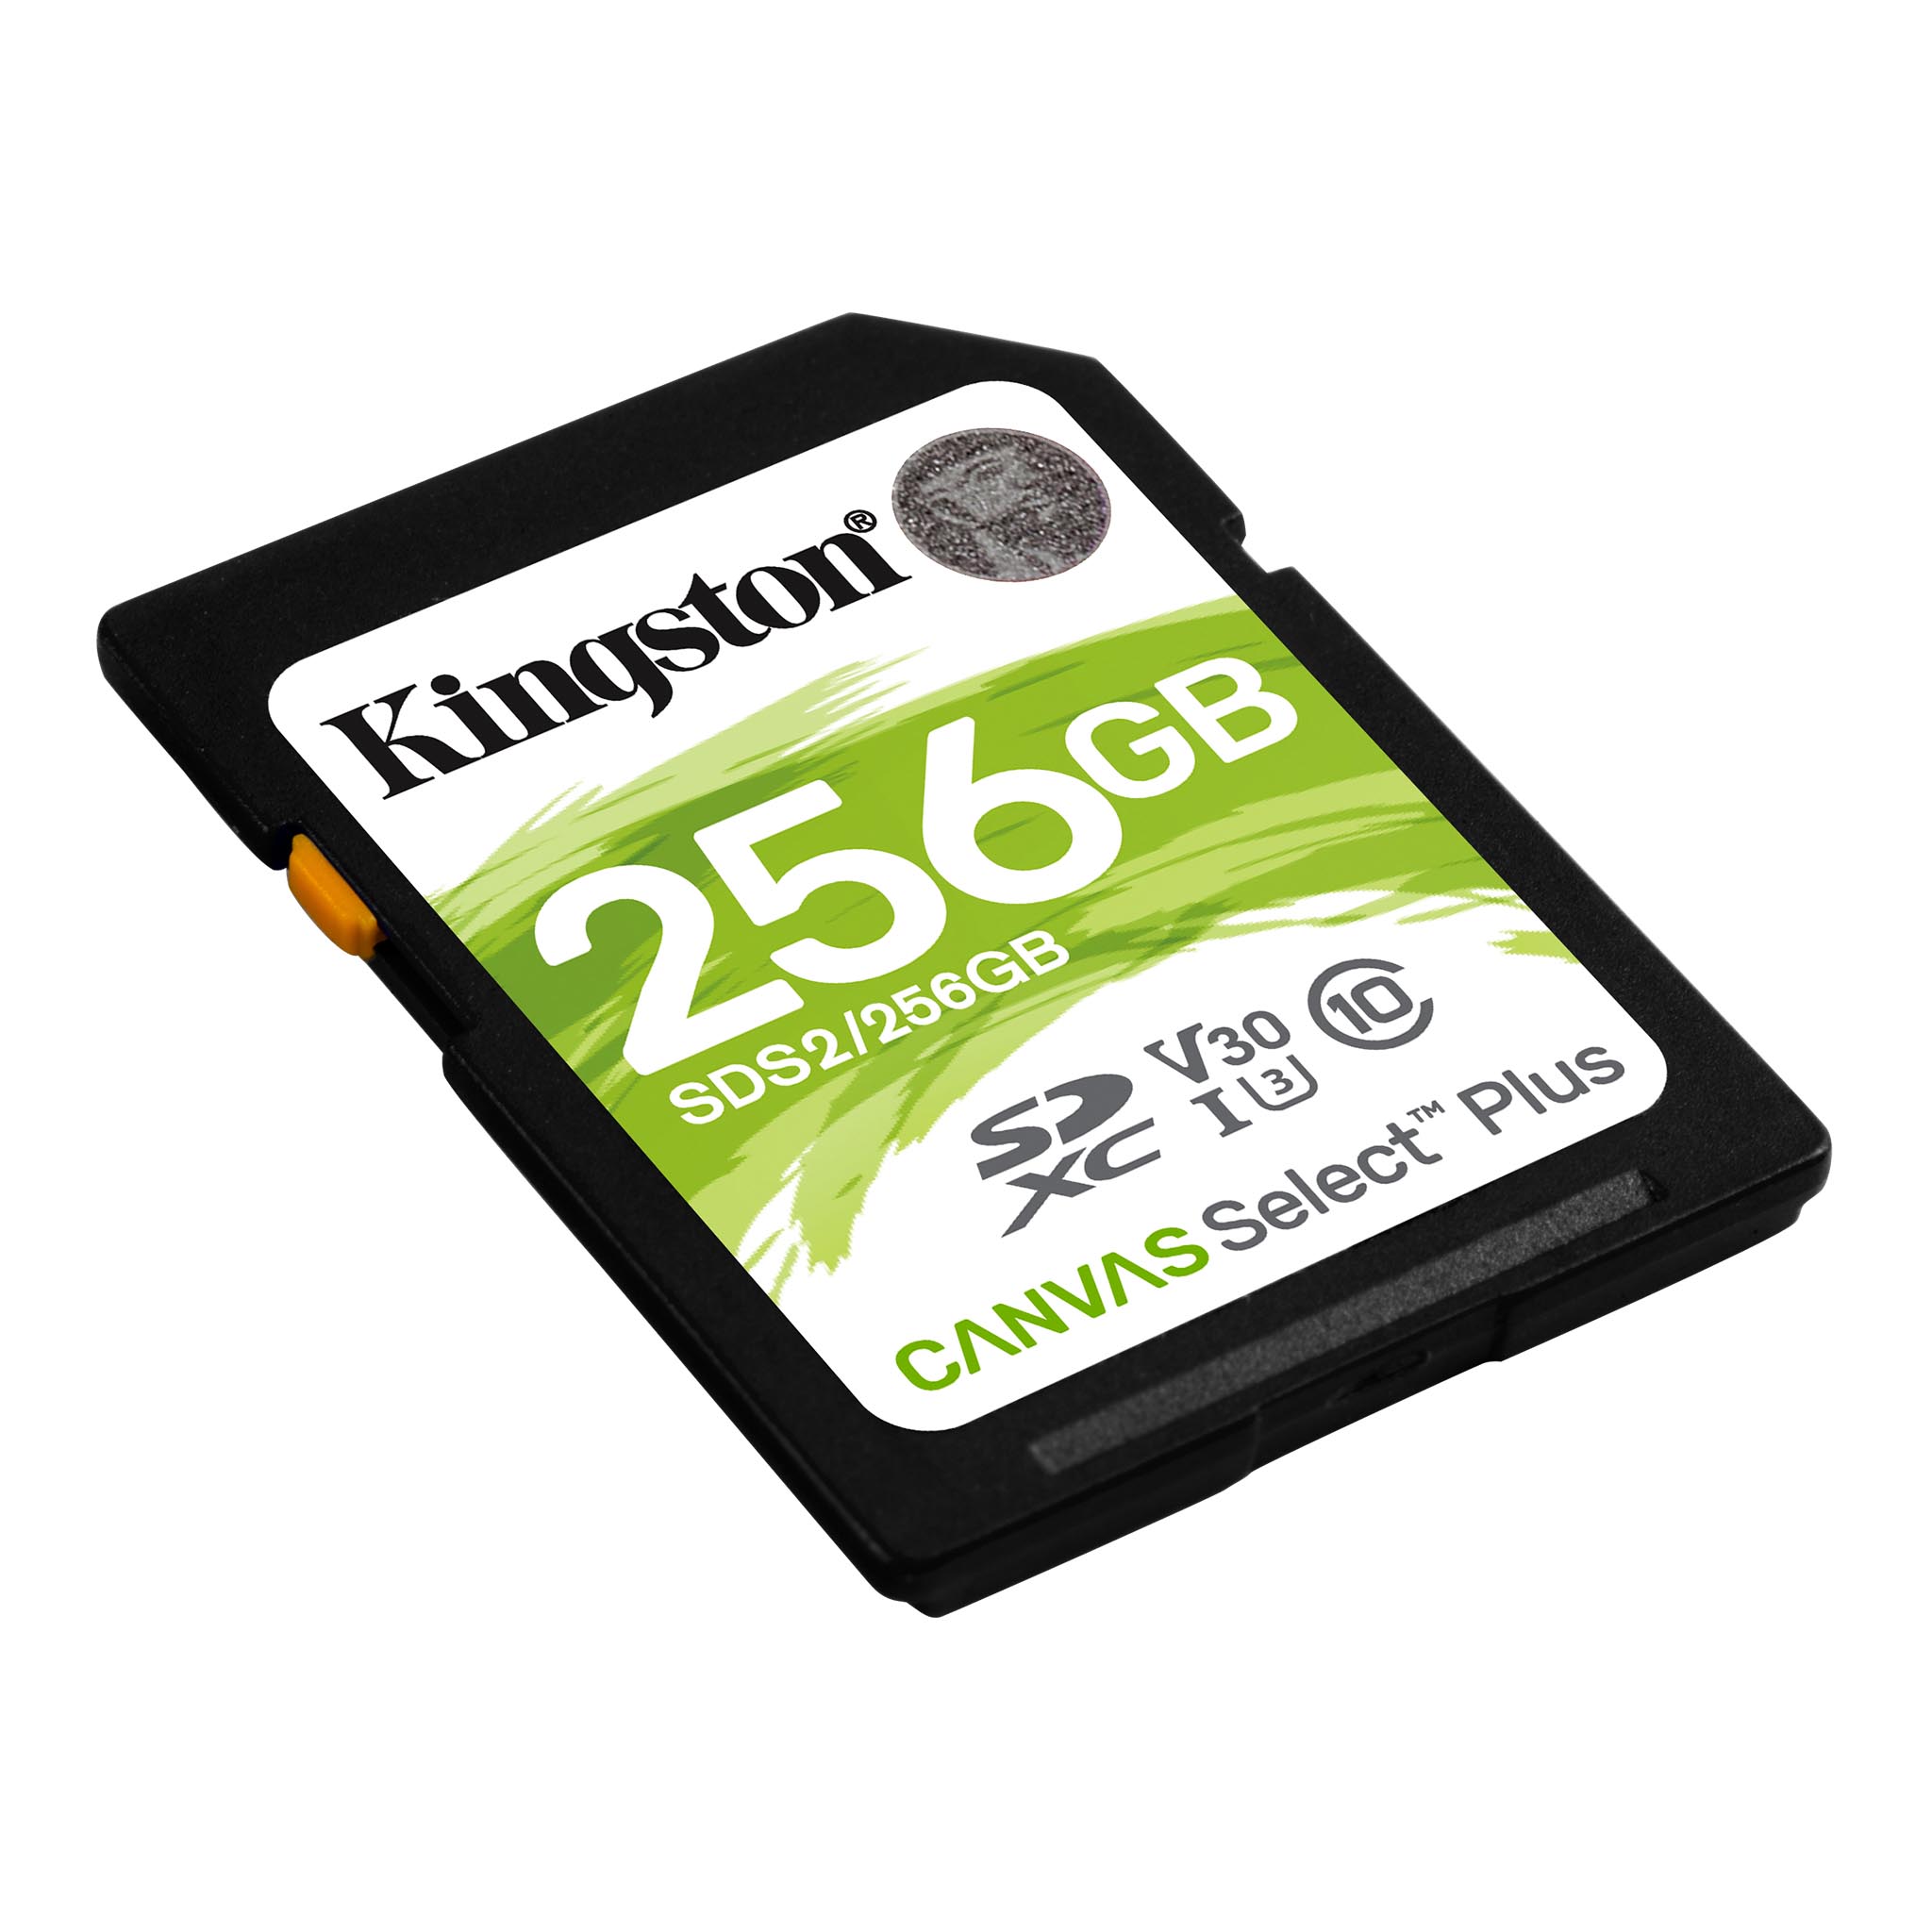 Kingston 64GB Samsung Galaxy S Duos 3 MicroSDXC Canvas Select Plus Card Verified by SanFlash. 100MBs Works with Kingston 